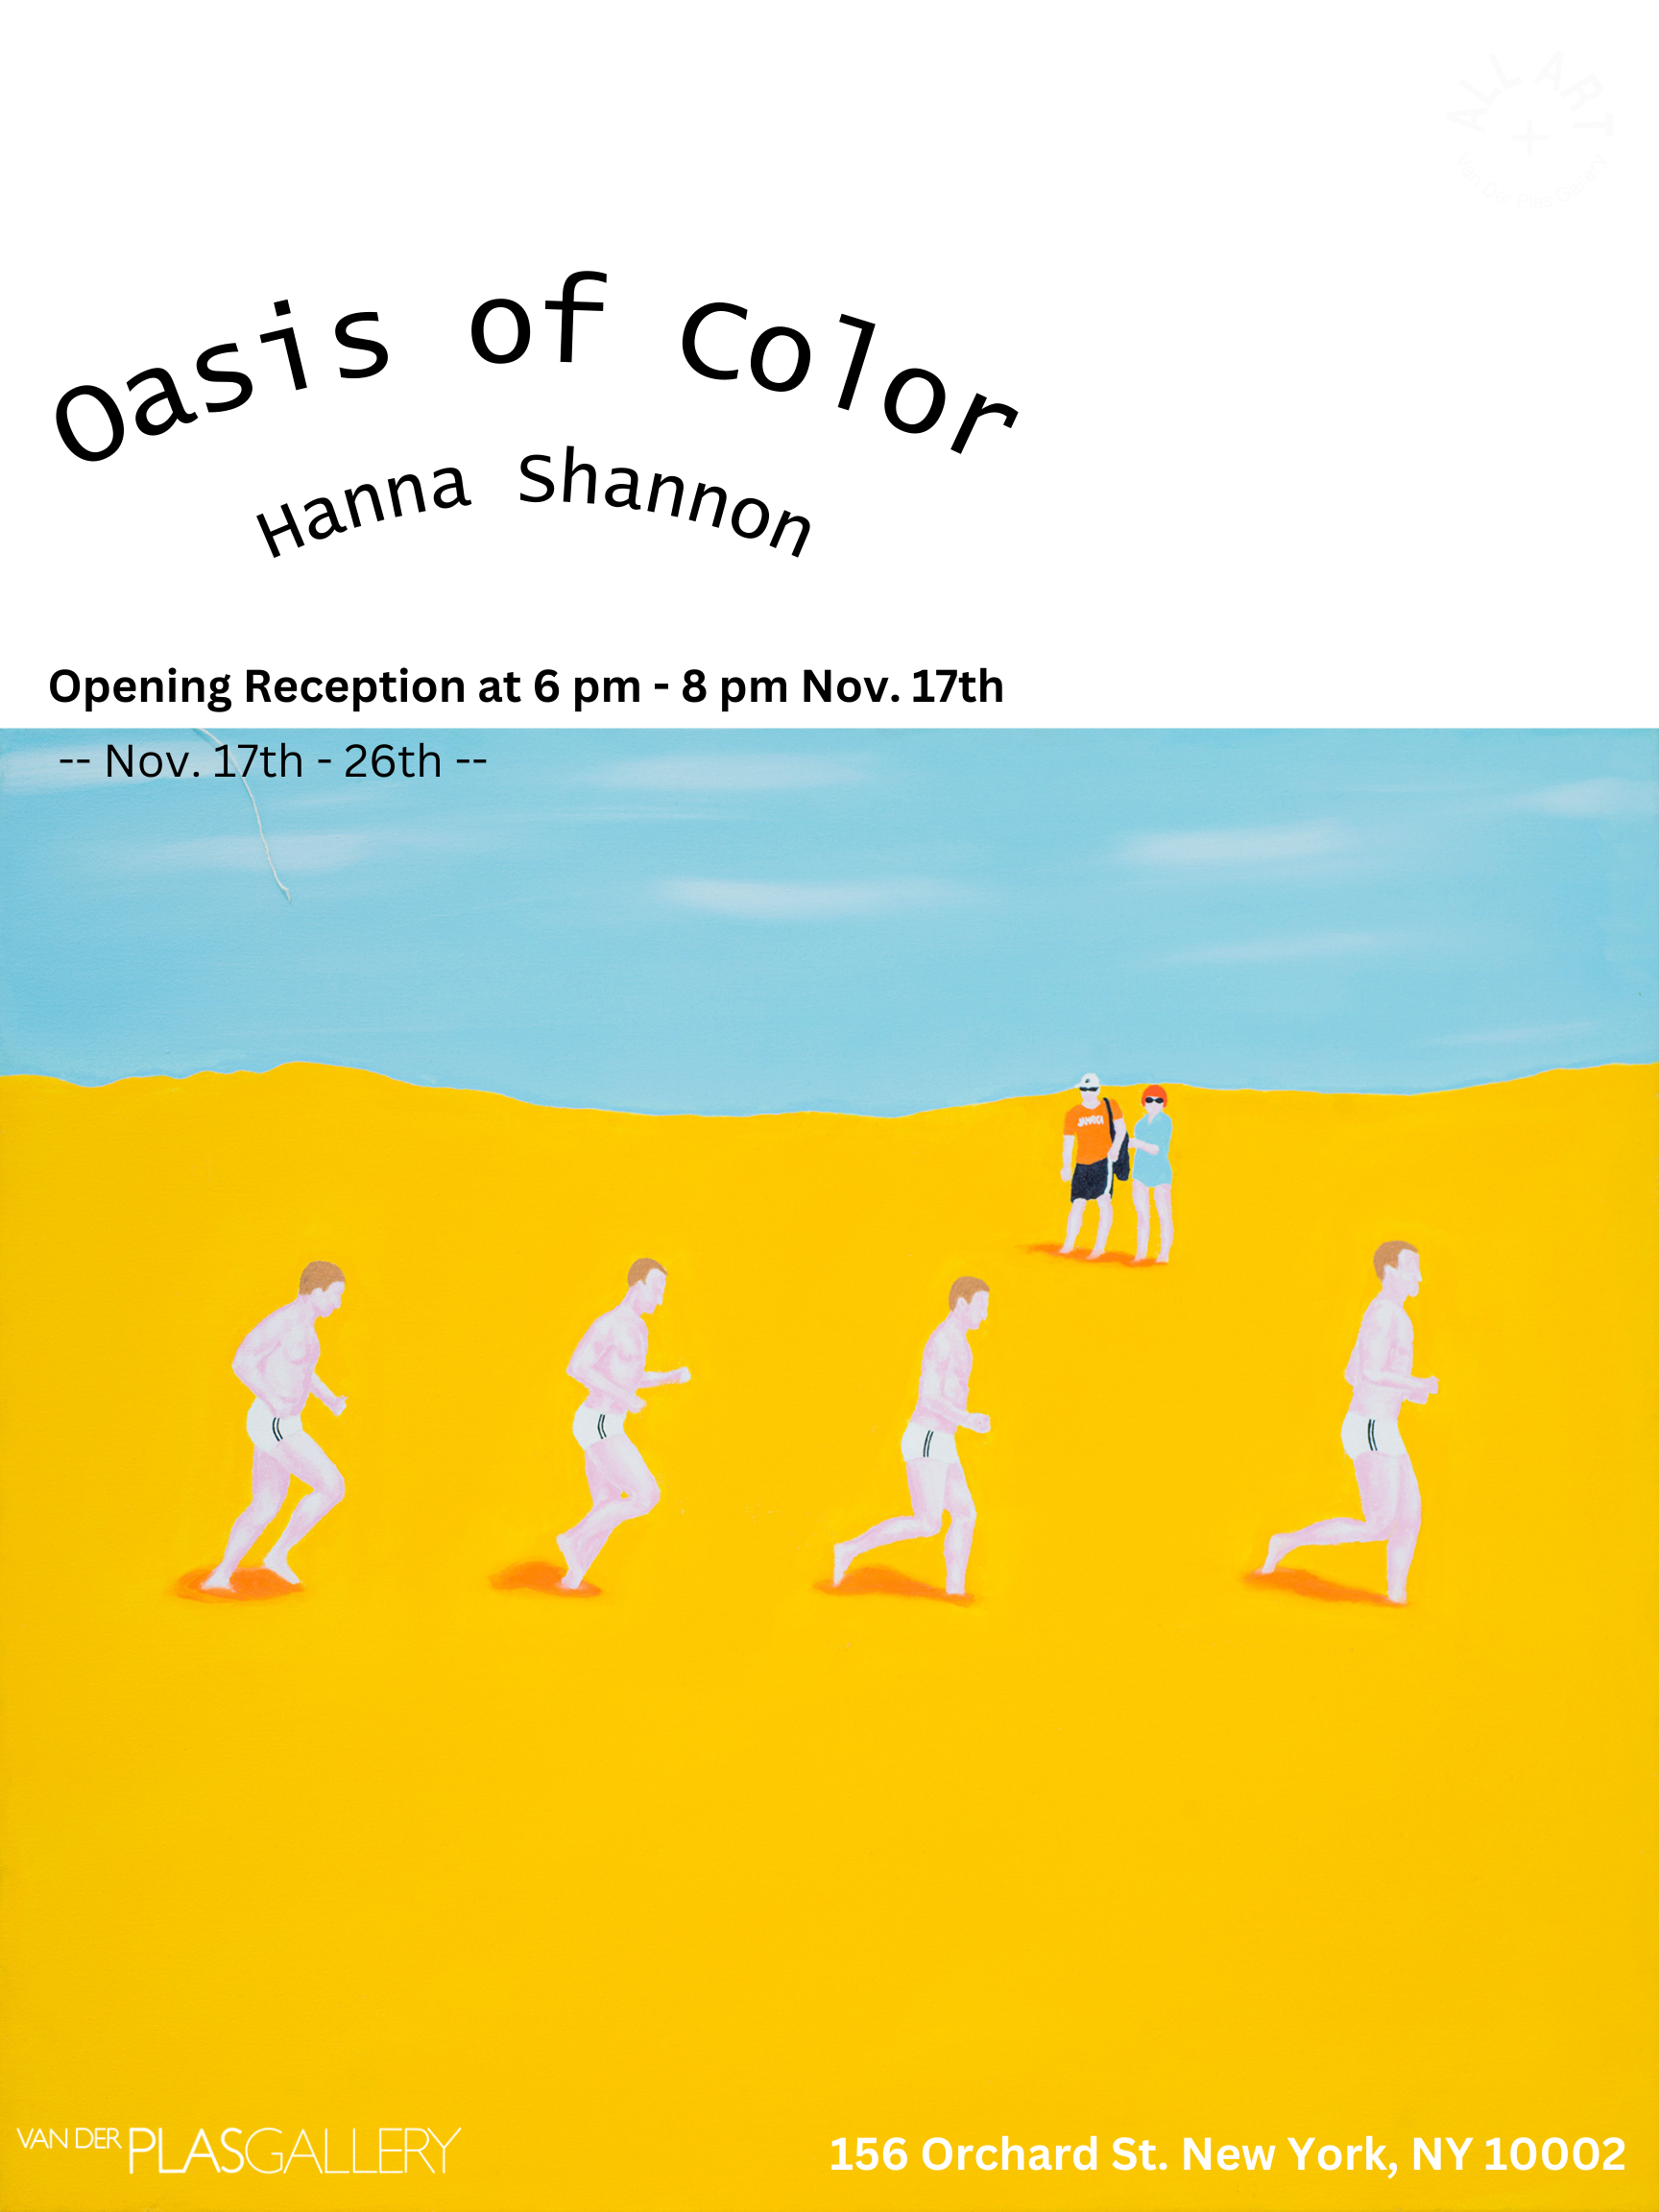 Oasis_of_color (2).png